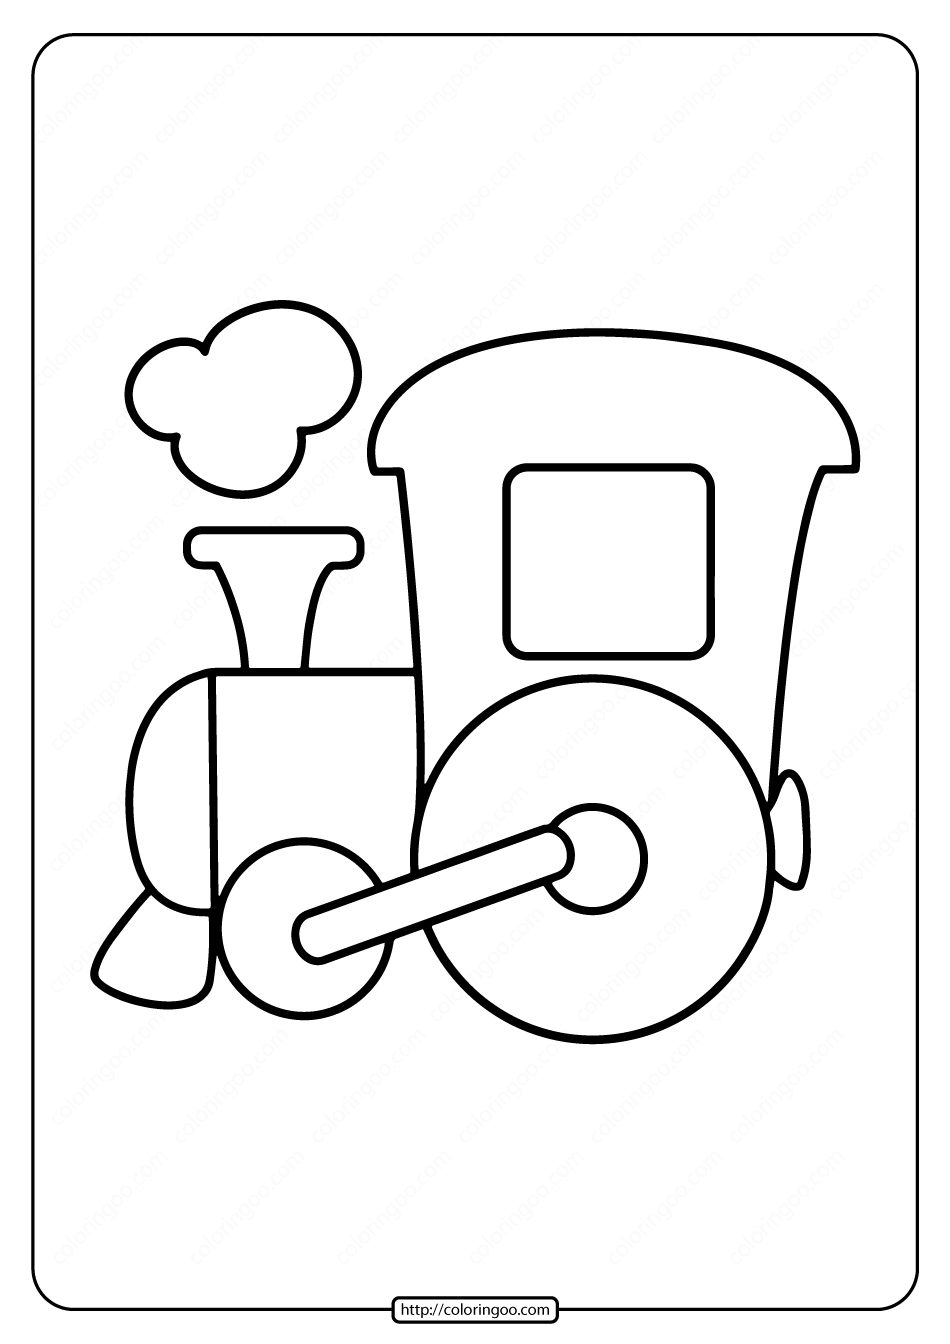 easy train coloring page for kids